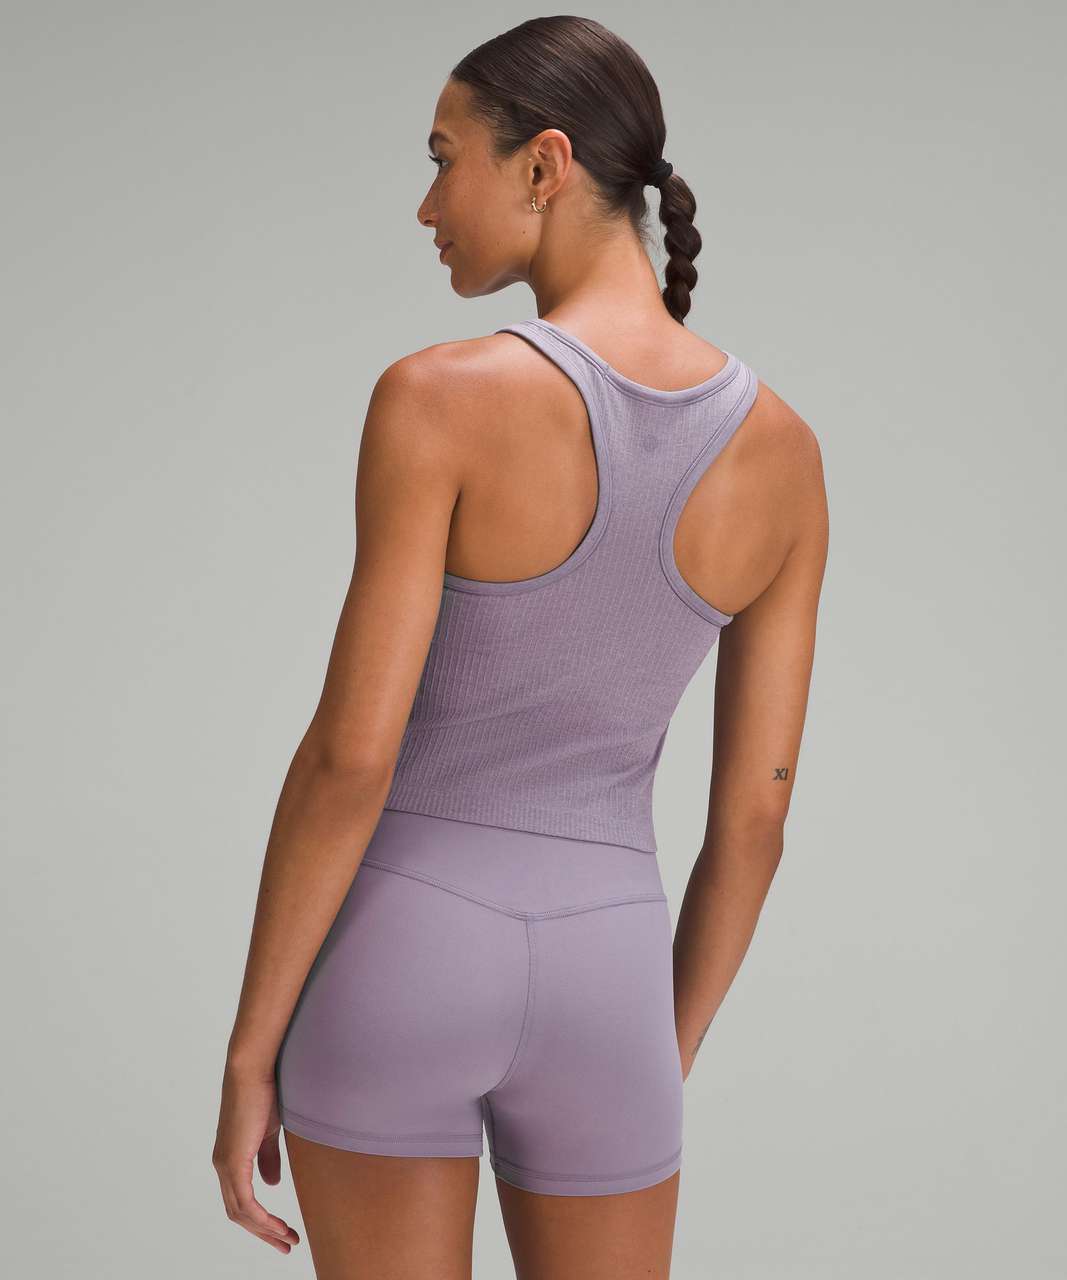 Replying to @tiktok2736485926 This is the best  lululemon